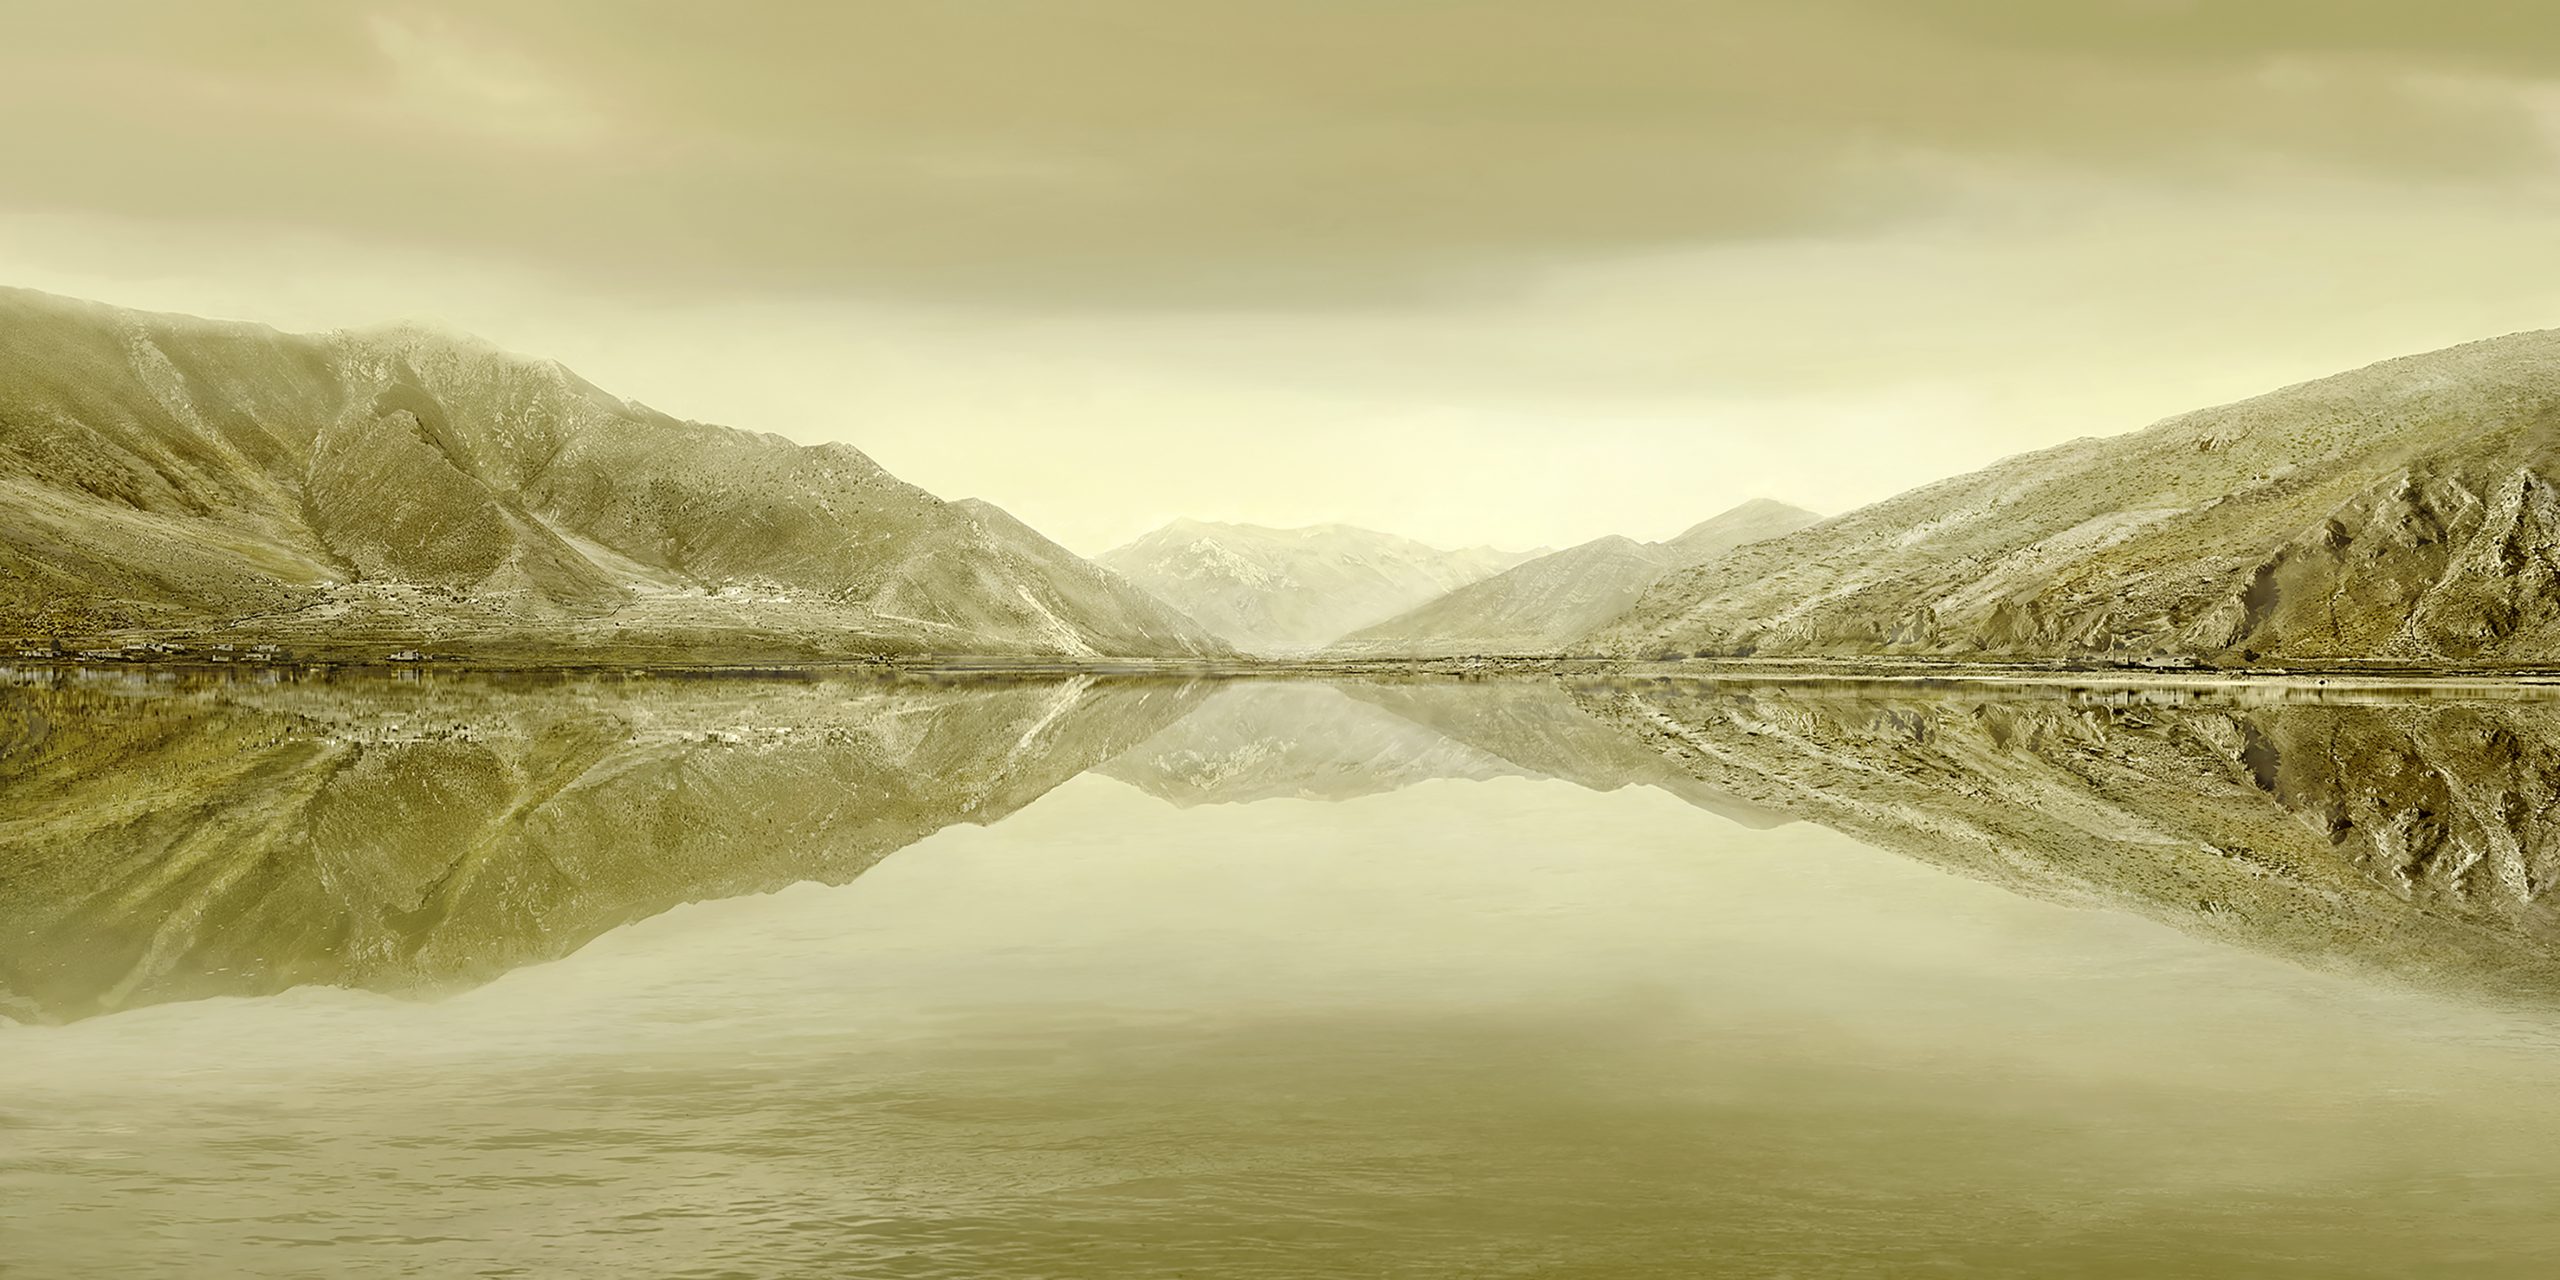 Landscape Yunnan 1 / Where tranquility lies, 2021 D-print on rag paper Edition of 8 200 x 100 cm